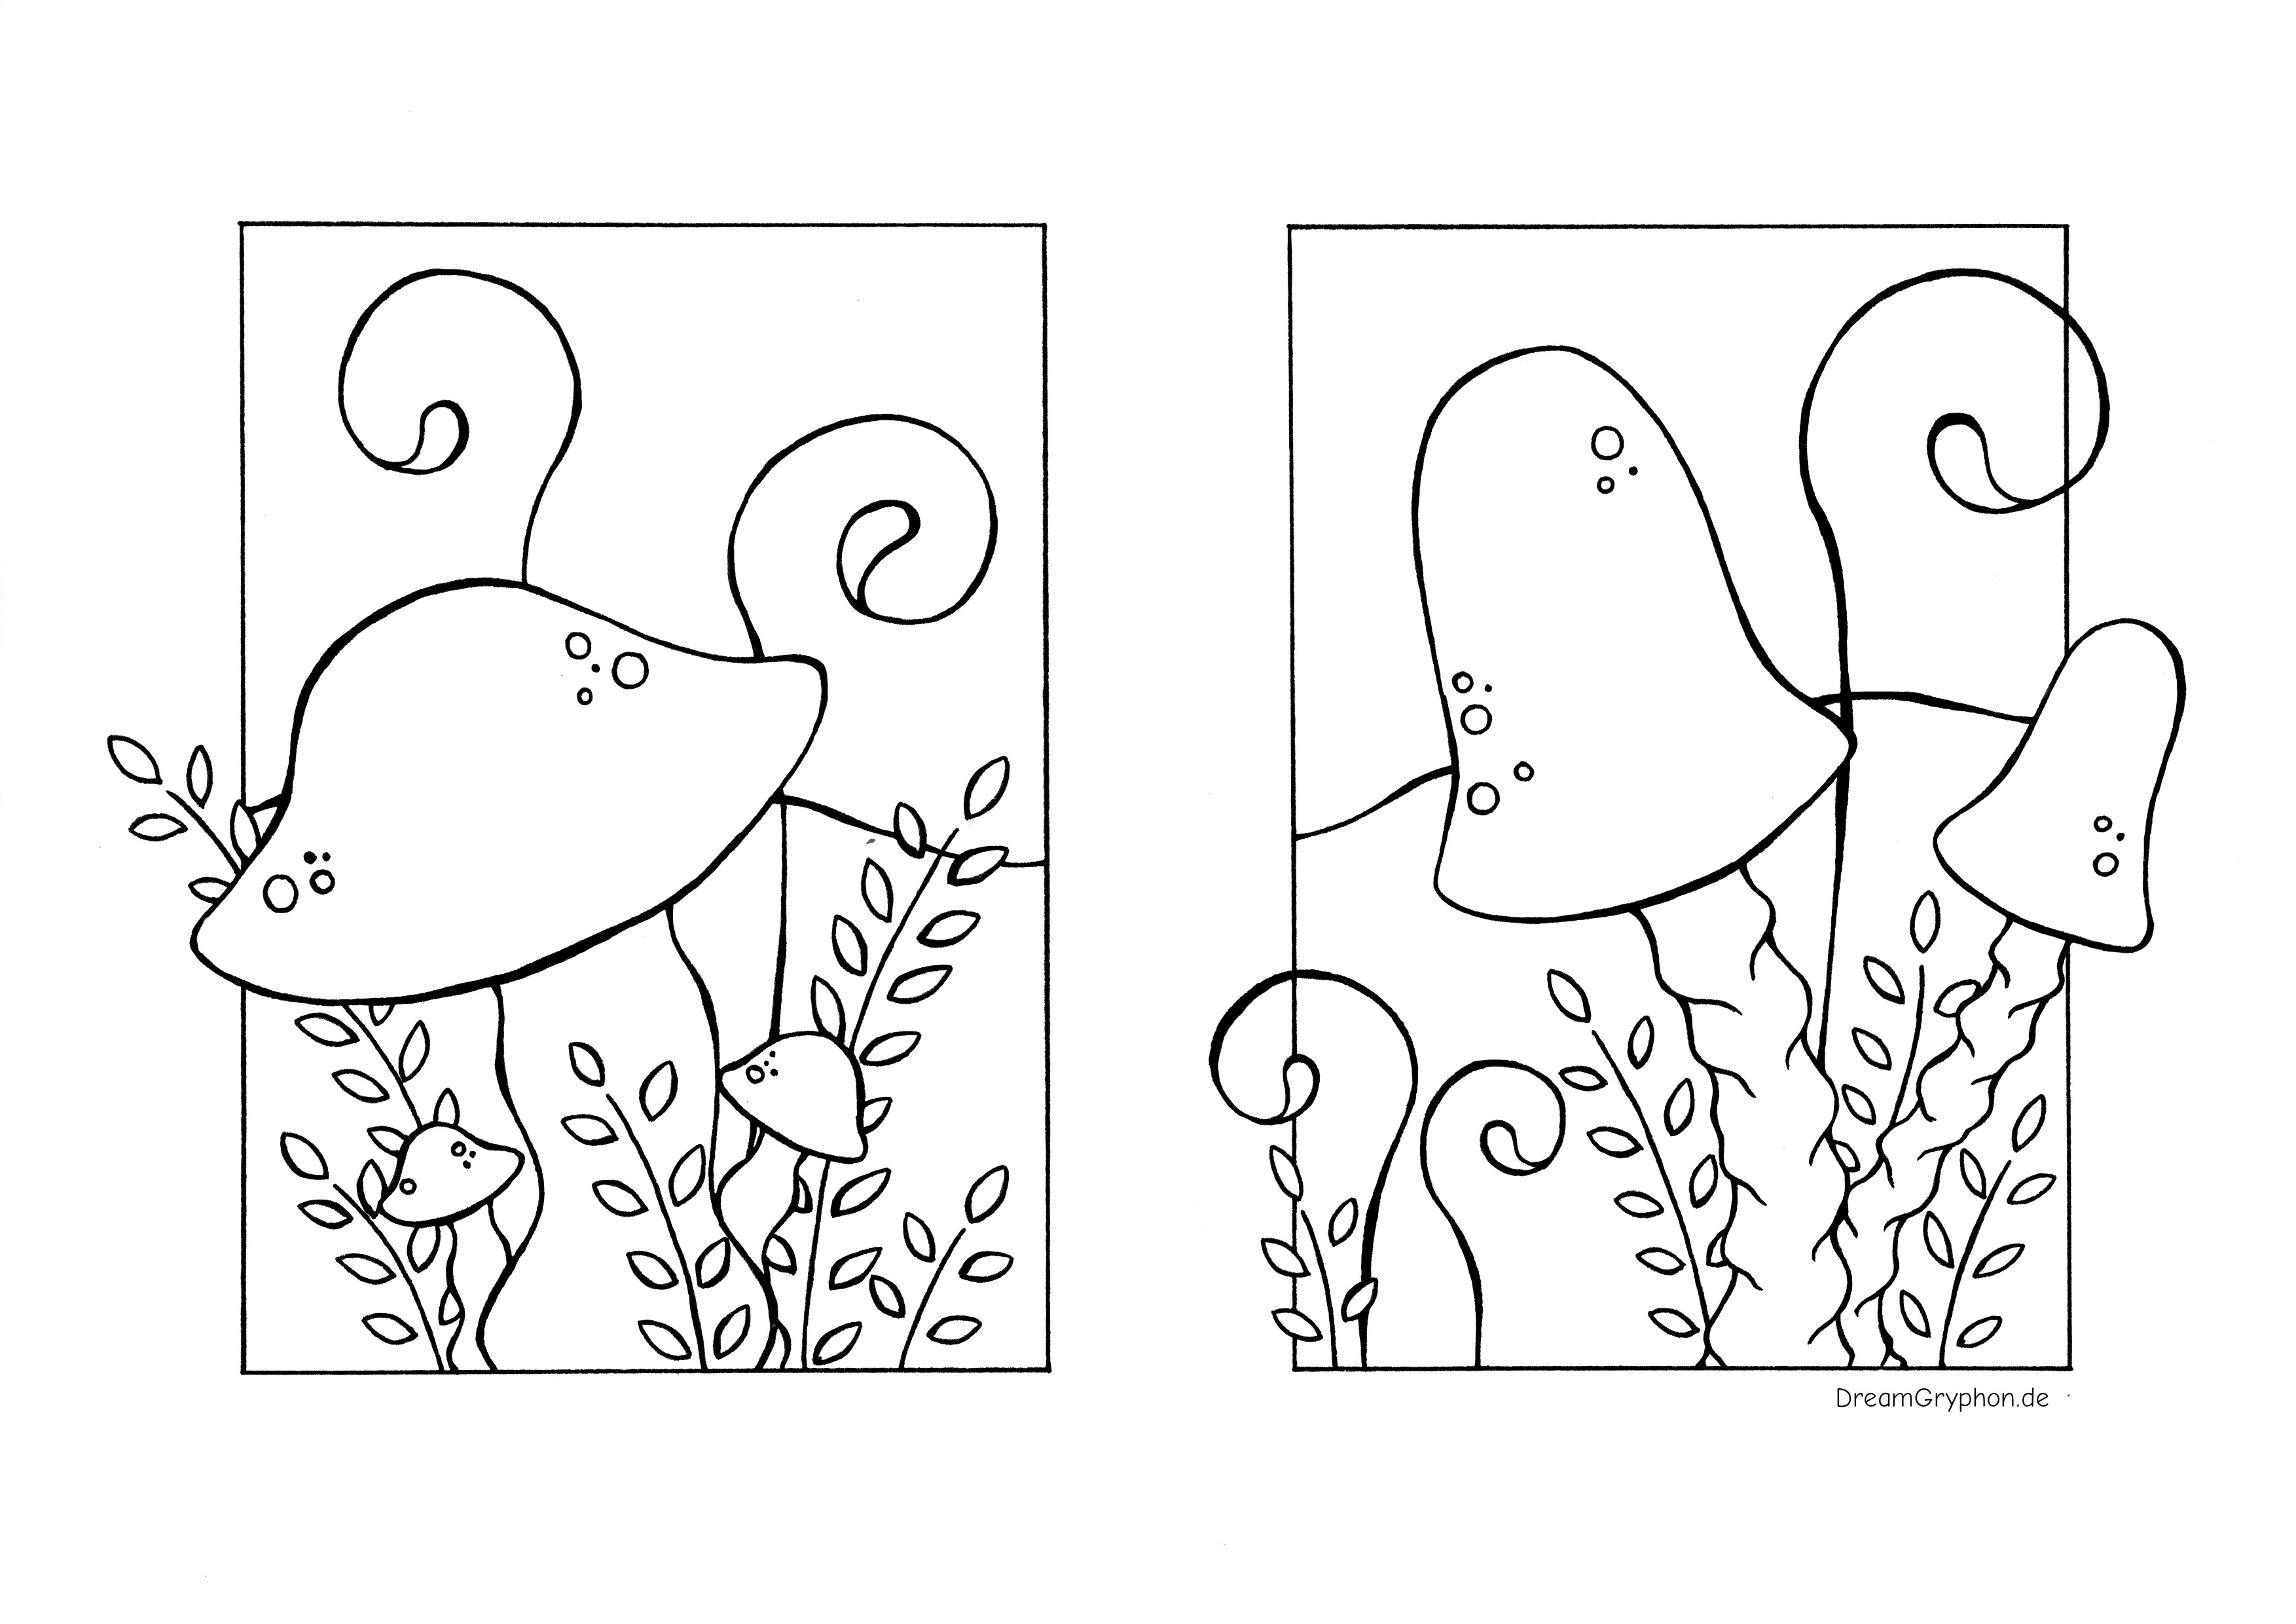 Coloring Page: Mushrooms and leaves.